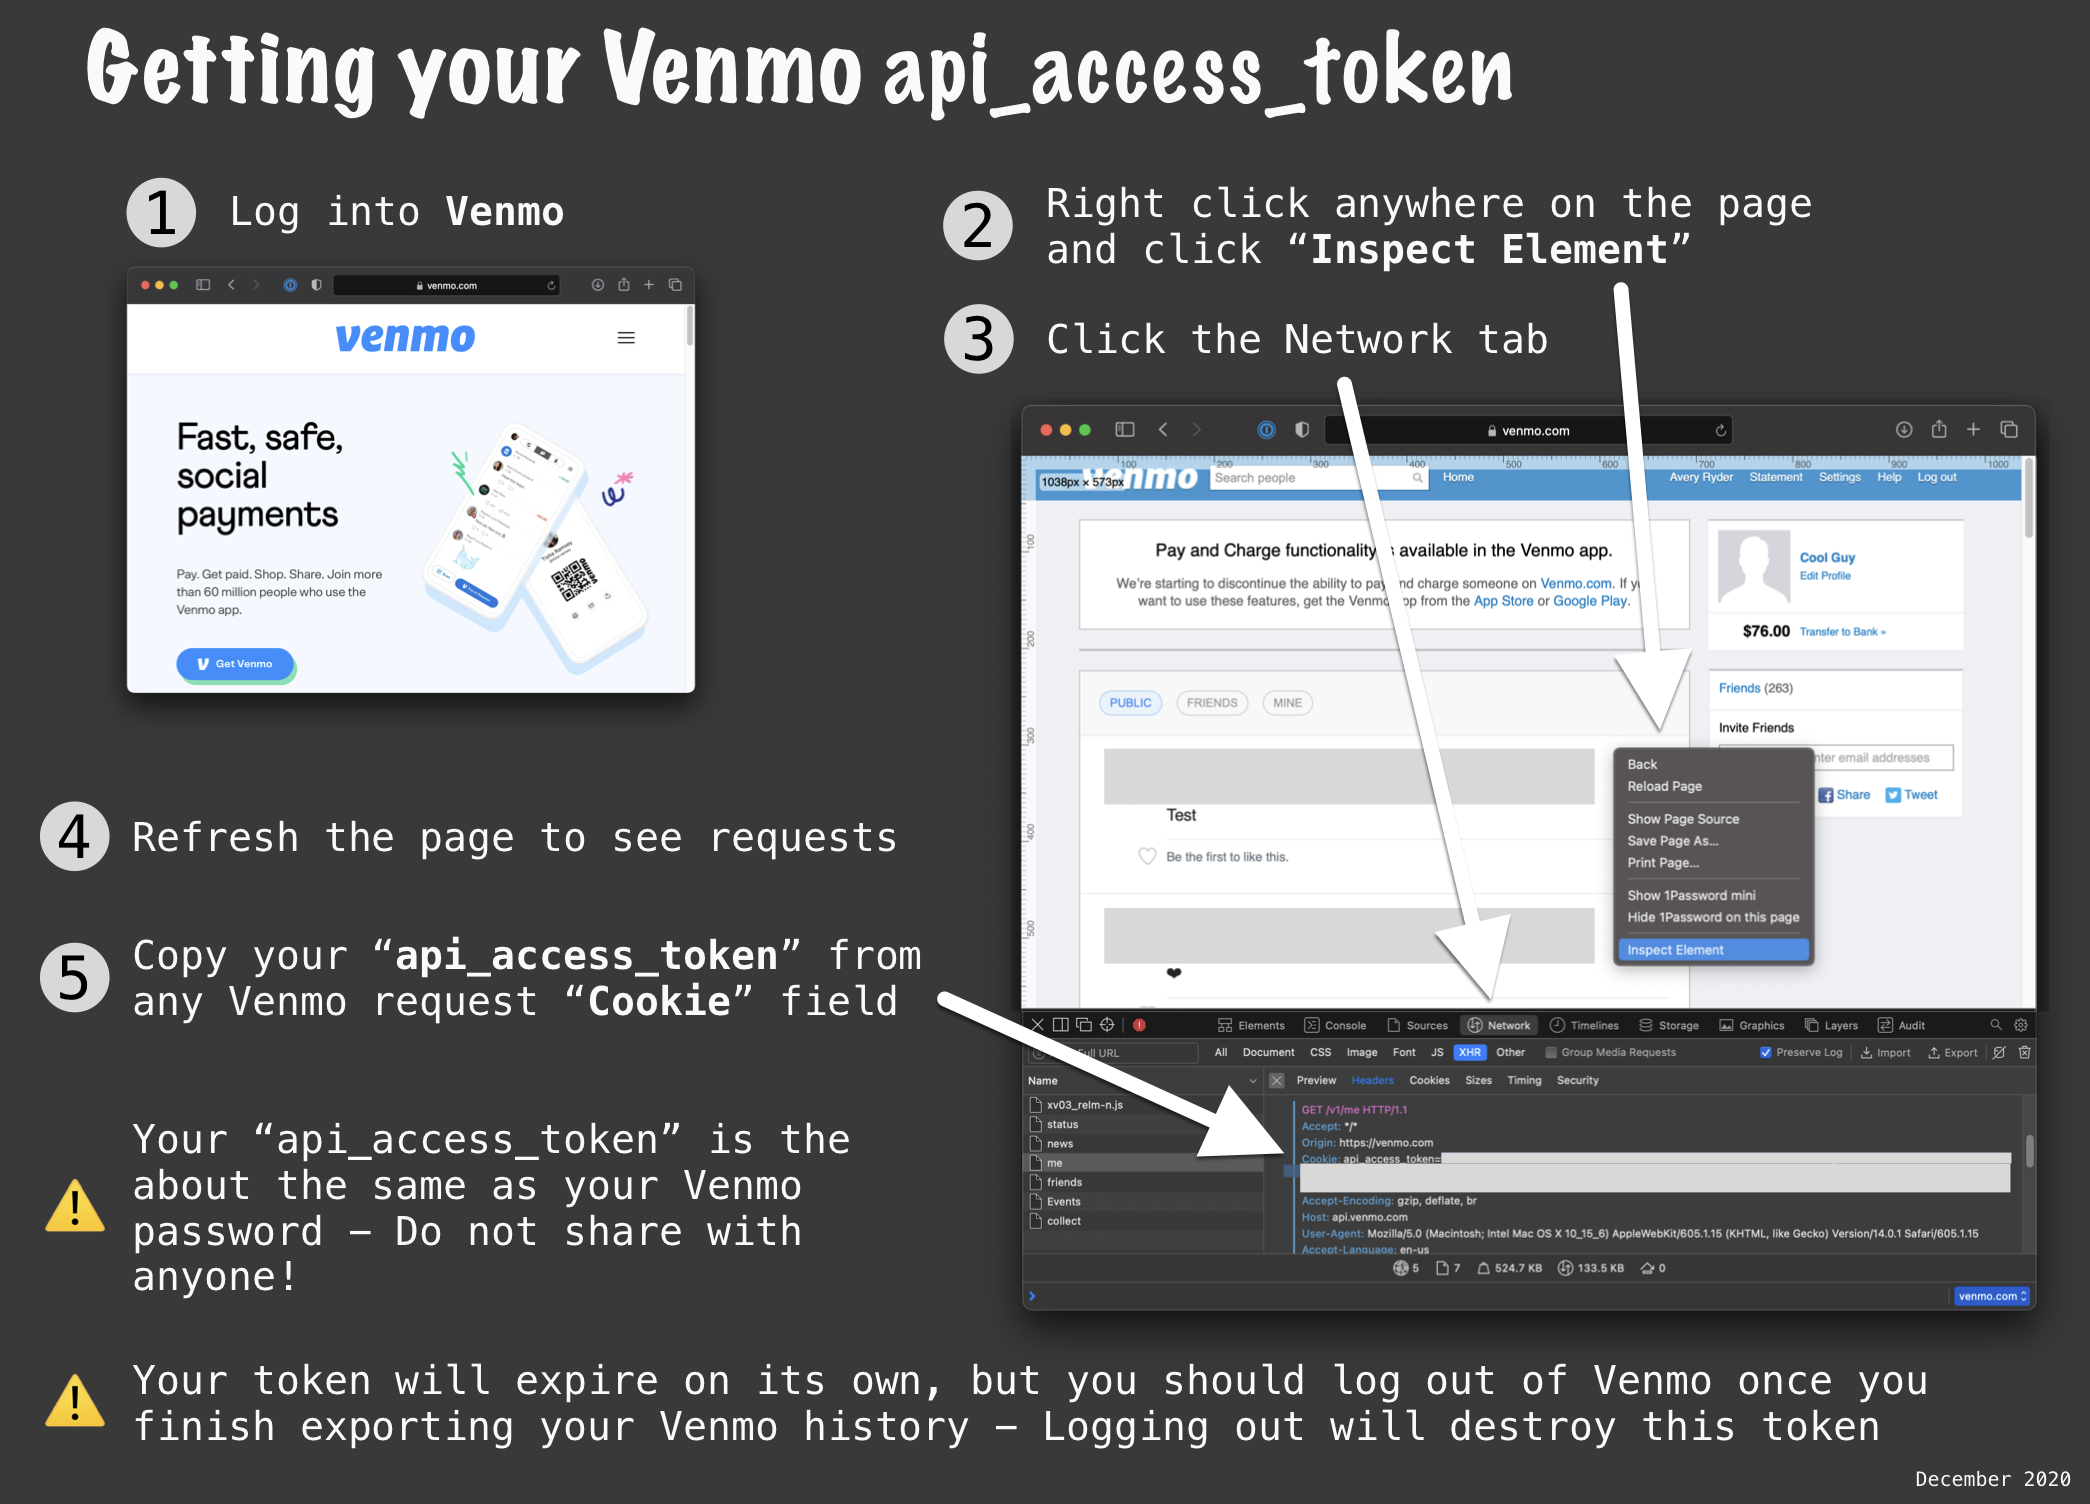 Venmo token fetching instructions